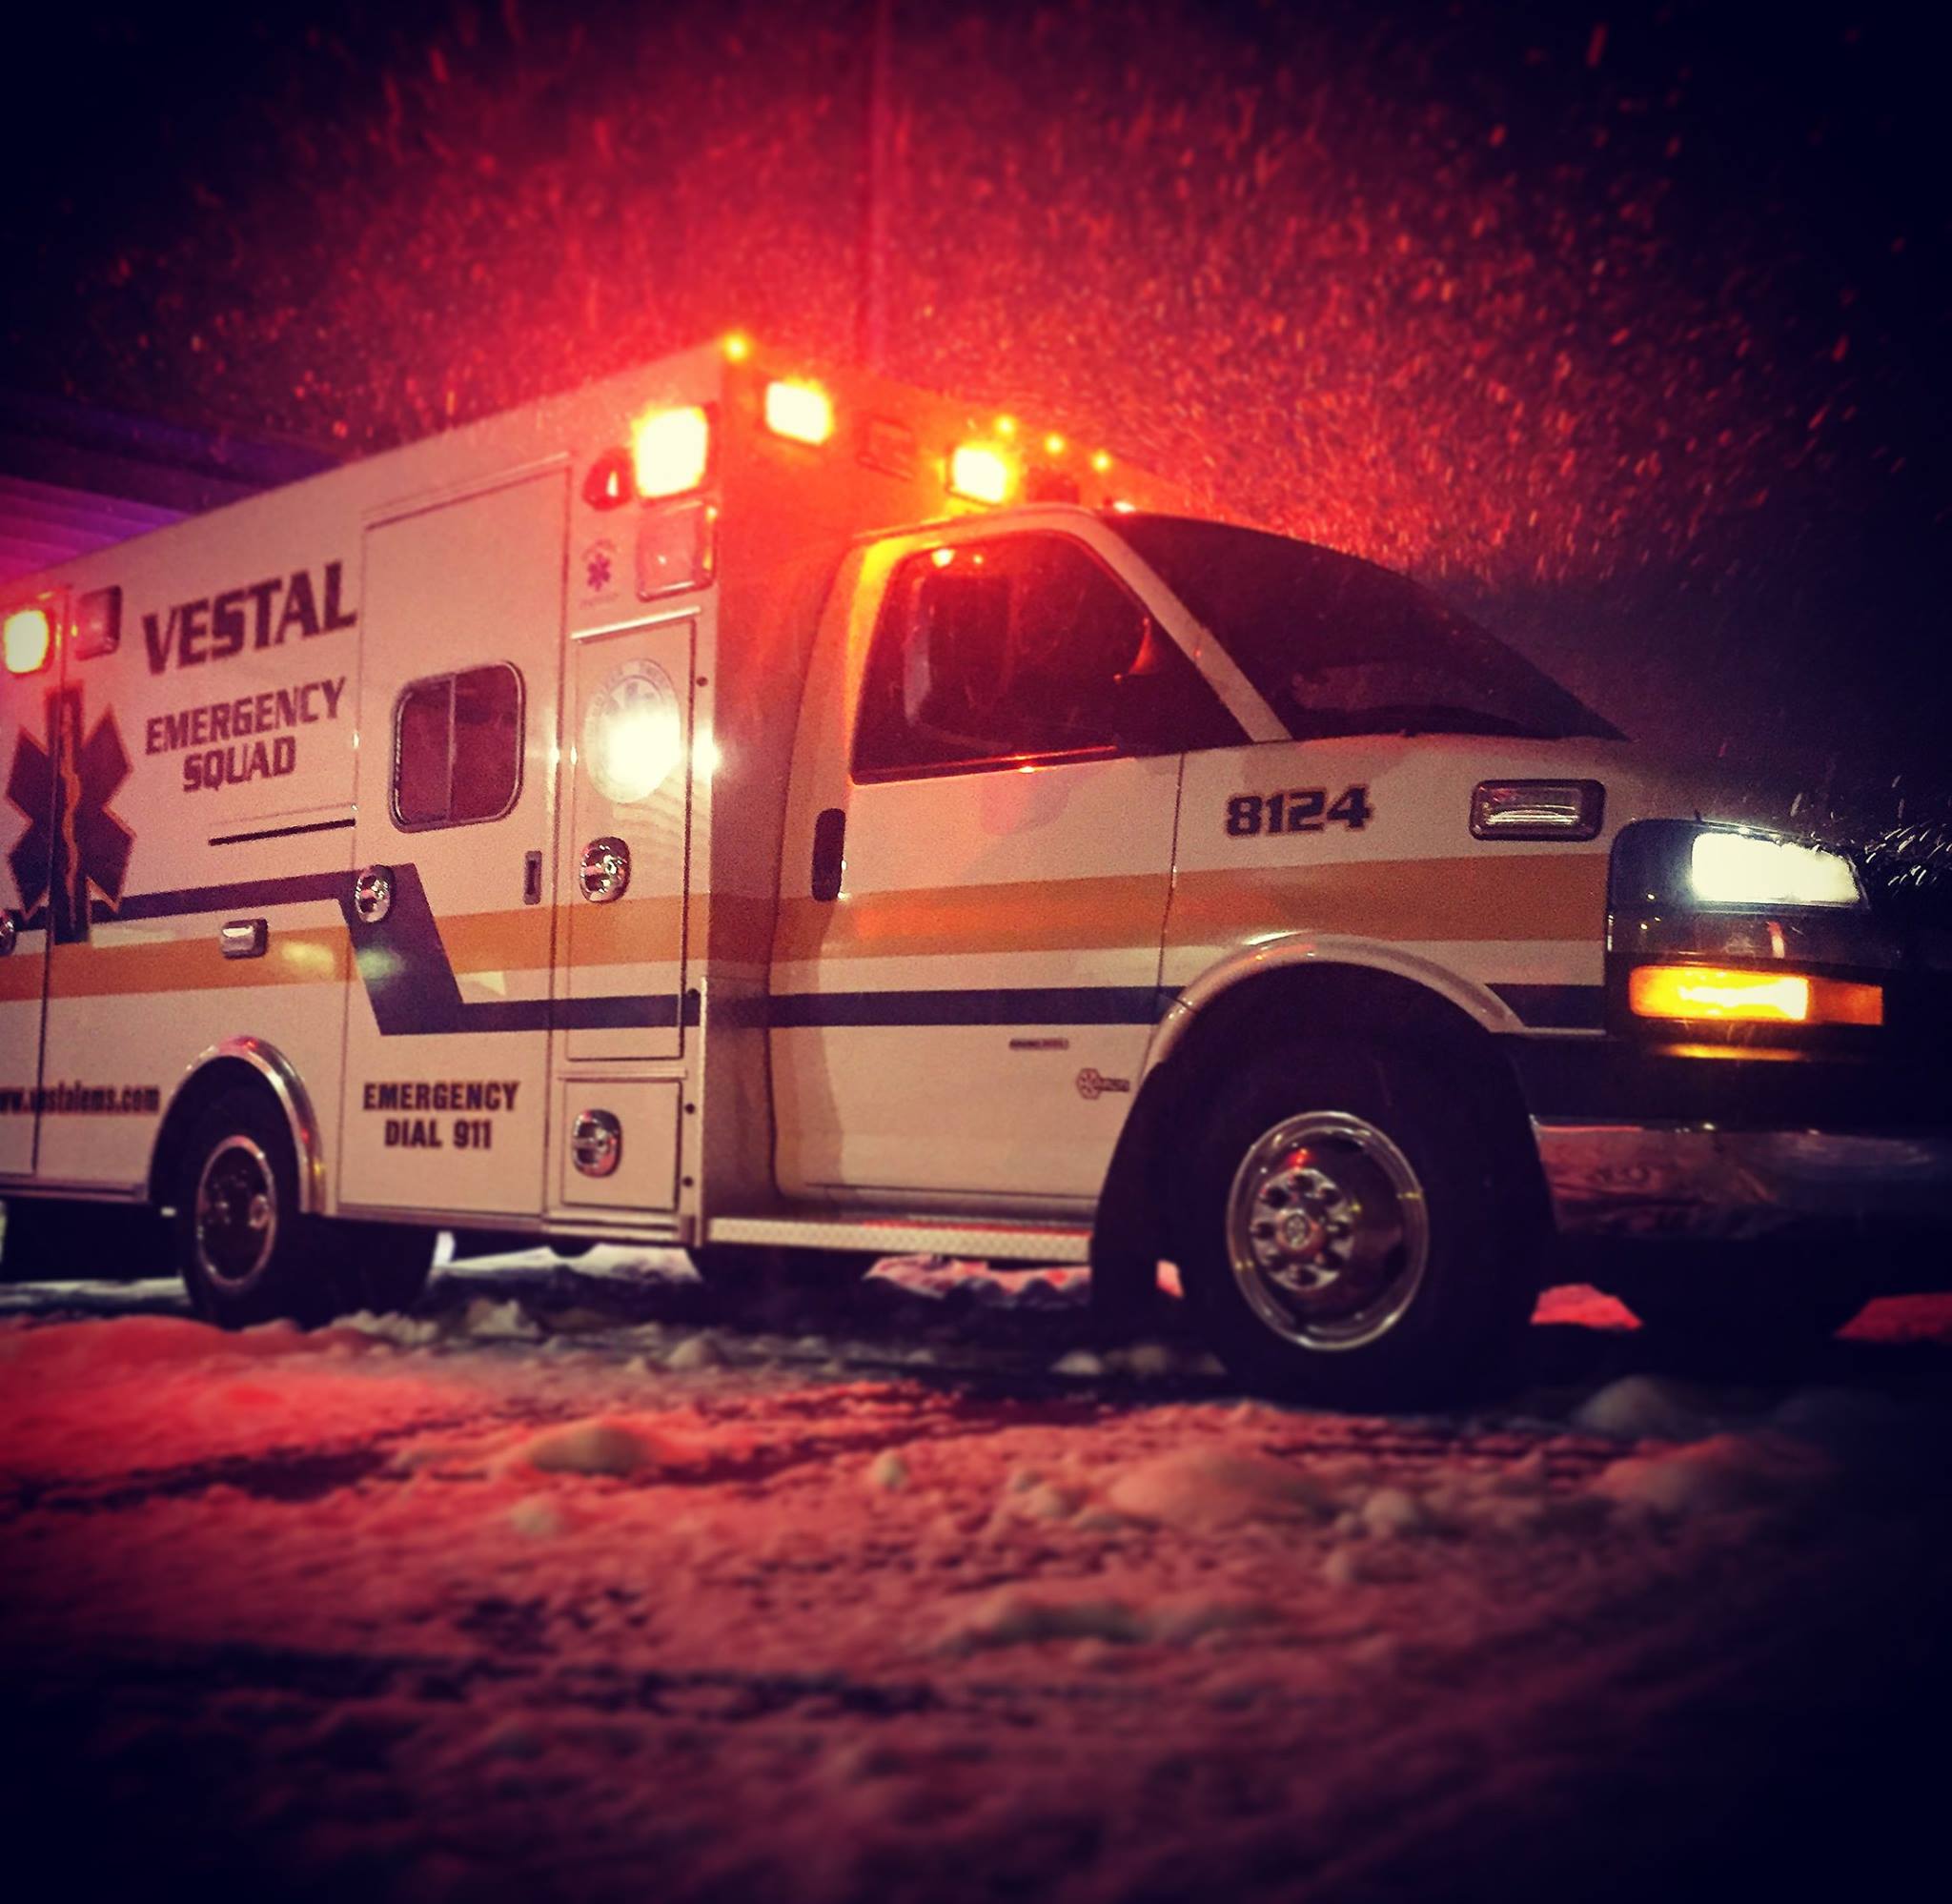 Vestal EMS Office with Apparatus